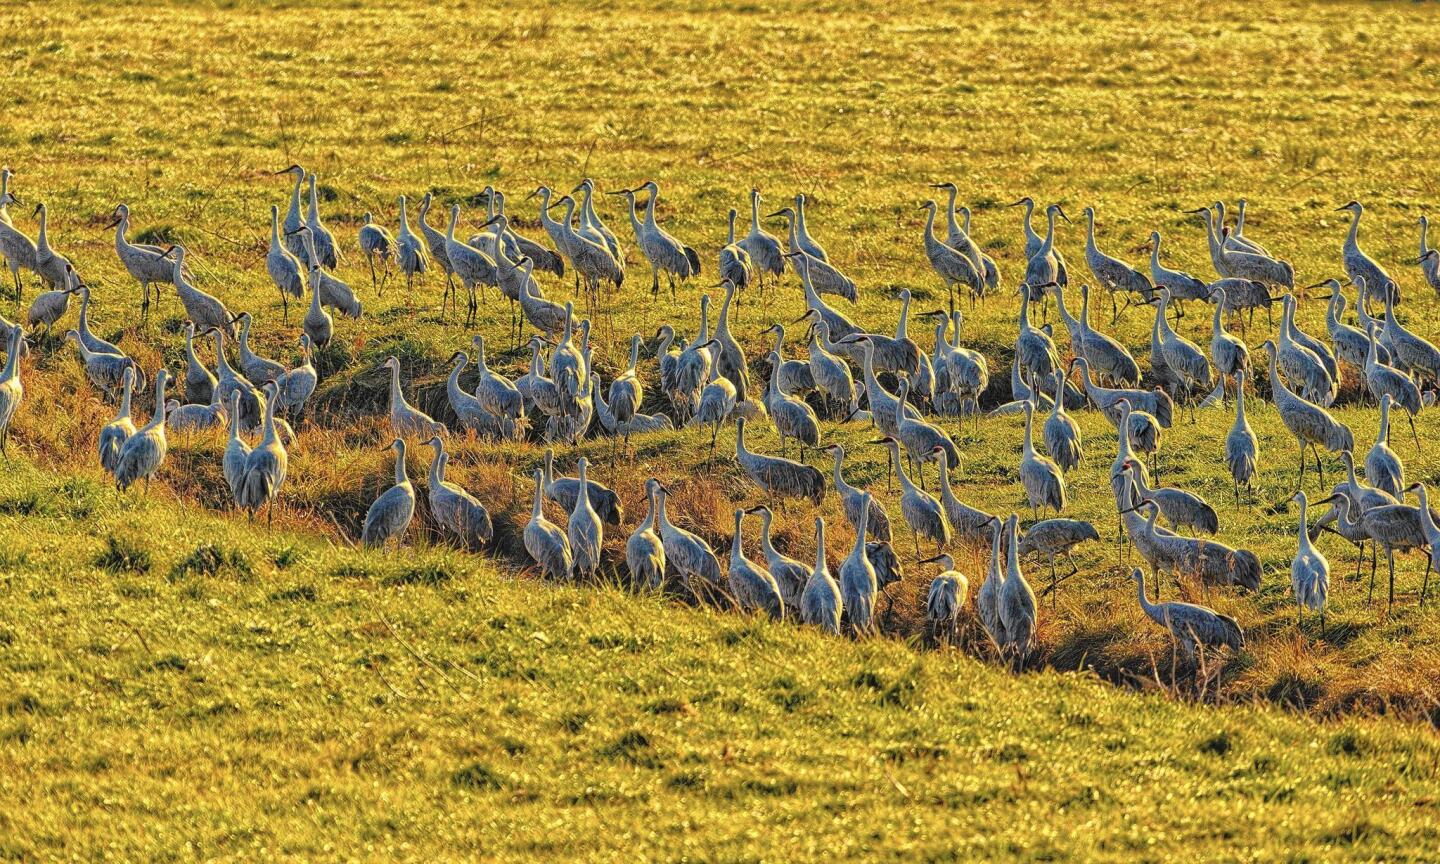 Cranes in Indiana